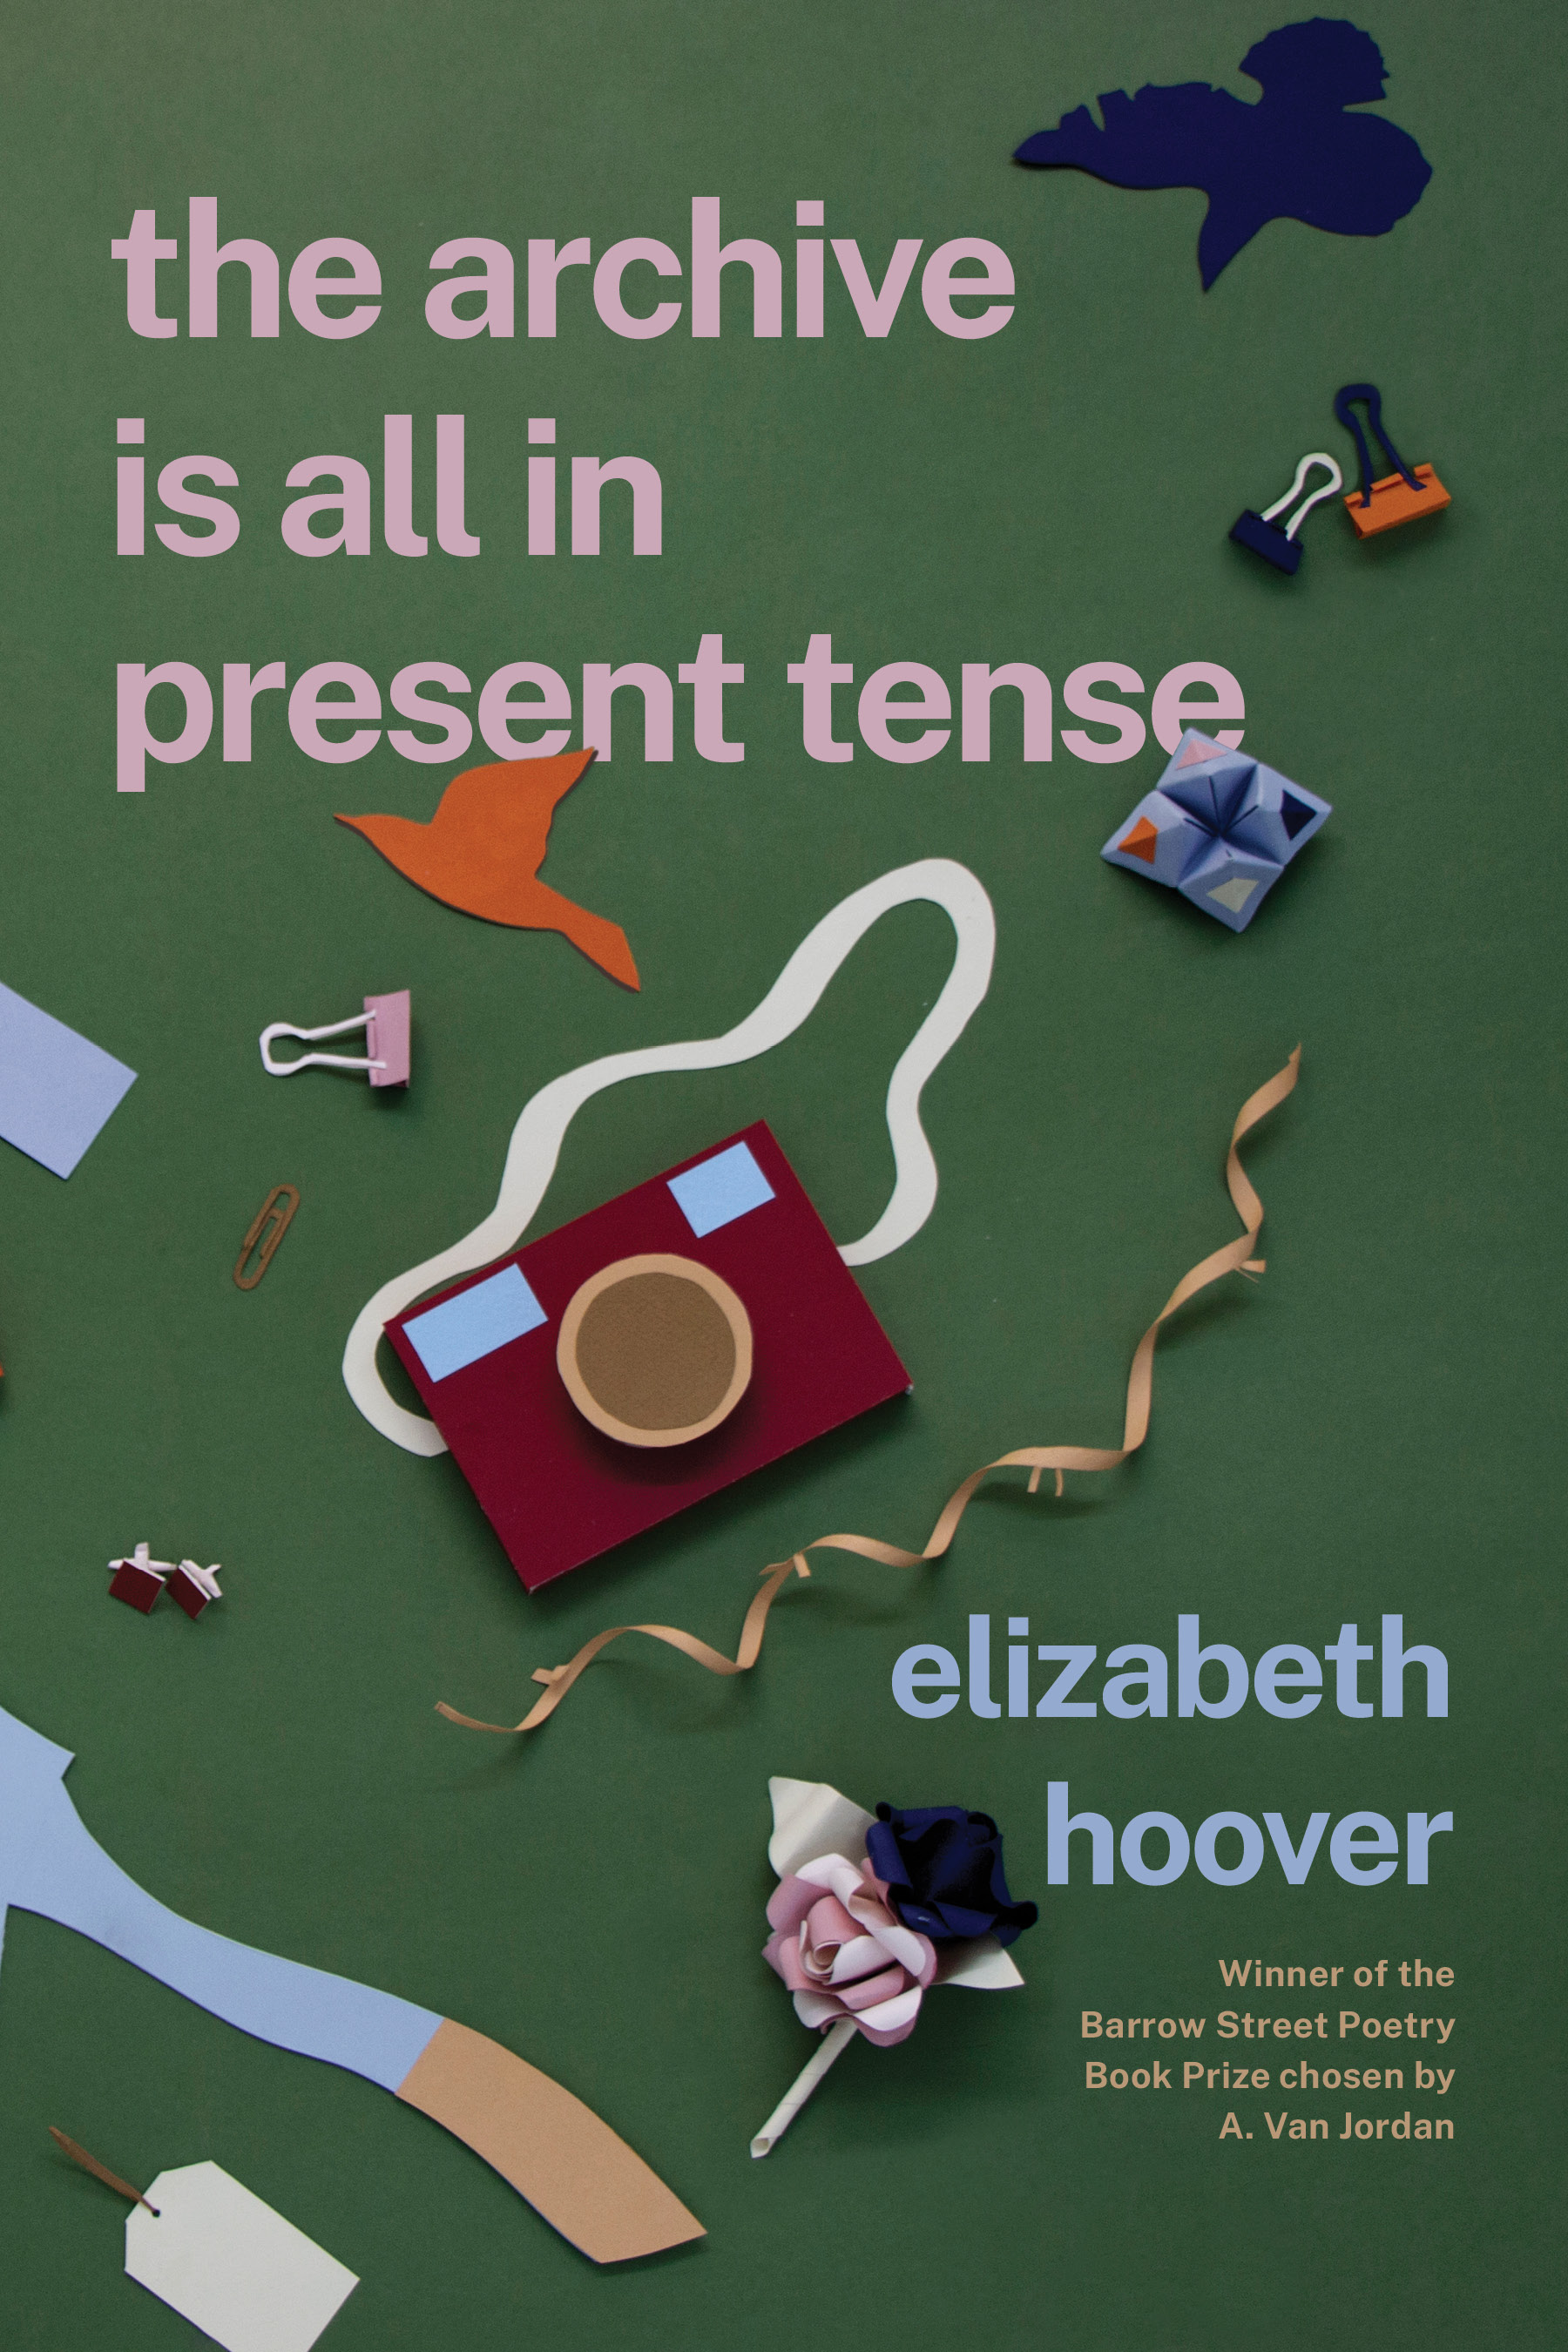 The cover to Professor Hoover's book